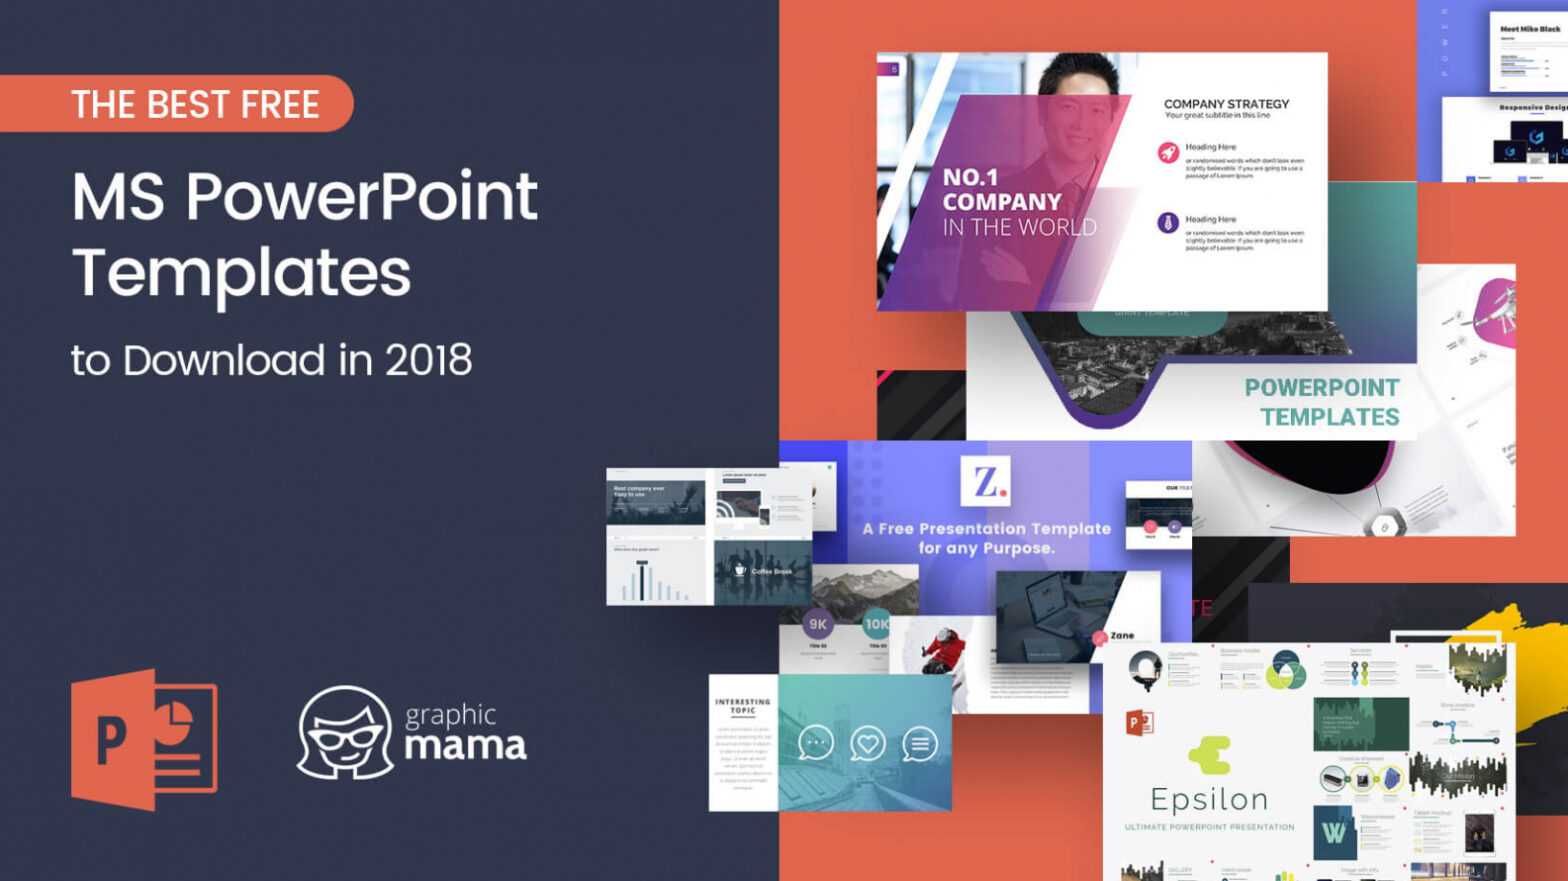 download free full version of powerpoint 2010